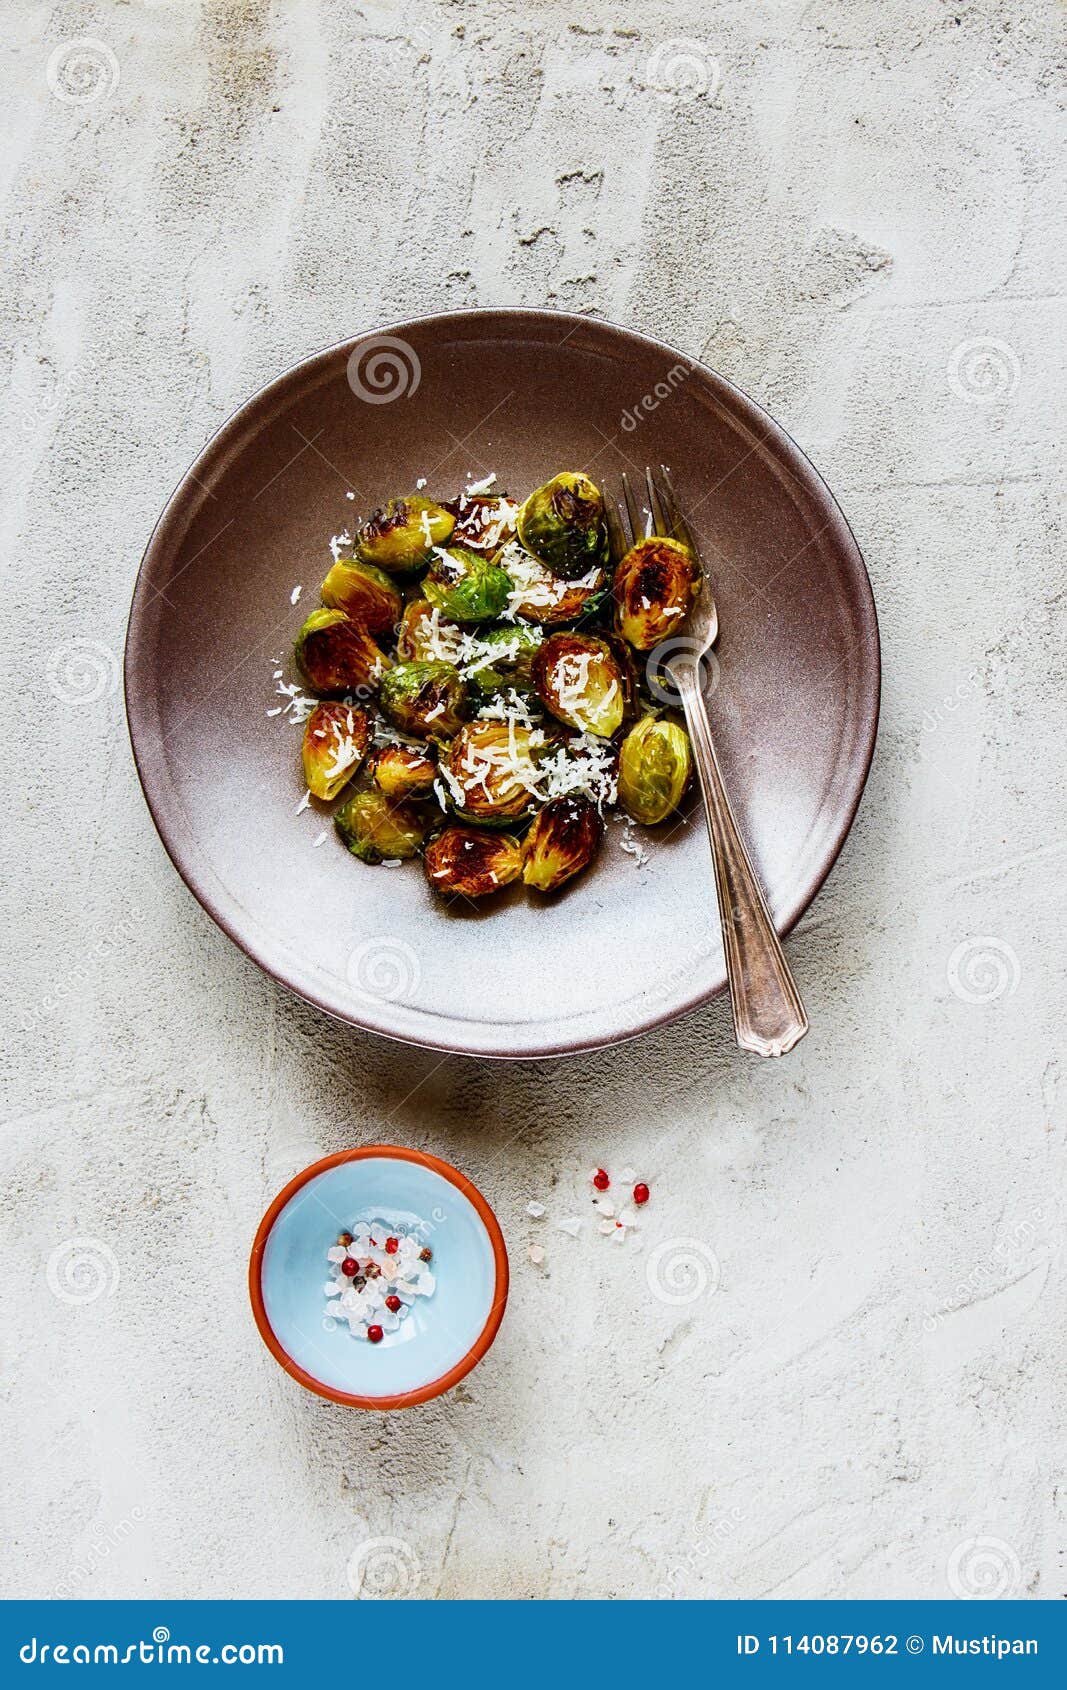 brussels sprouts with parmesan